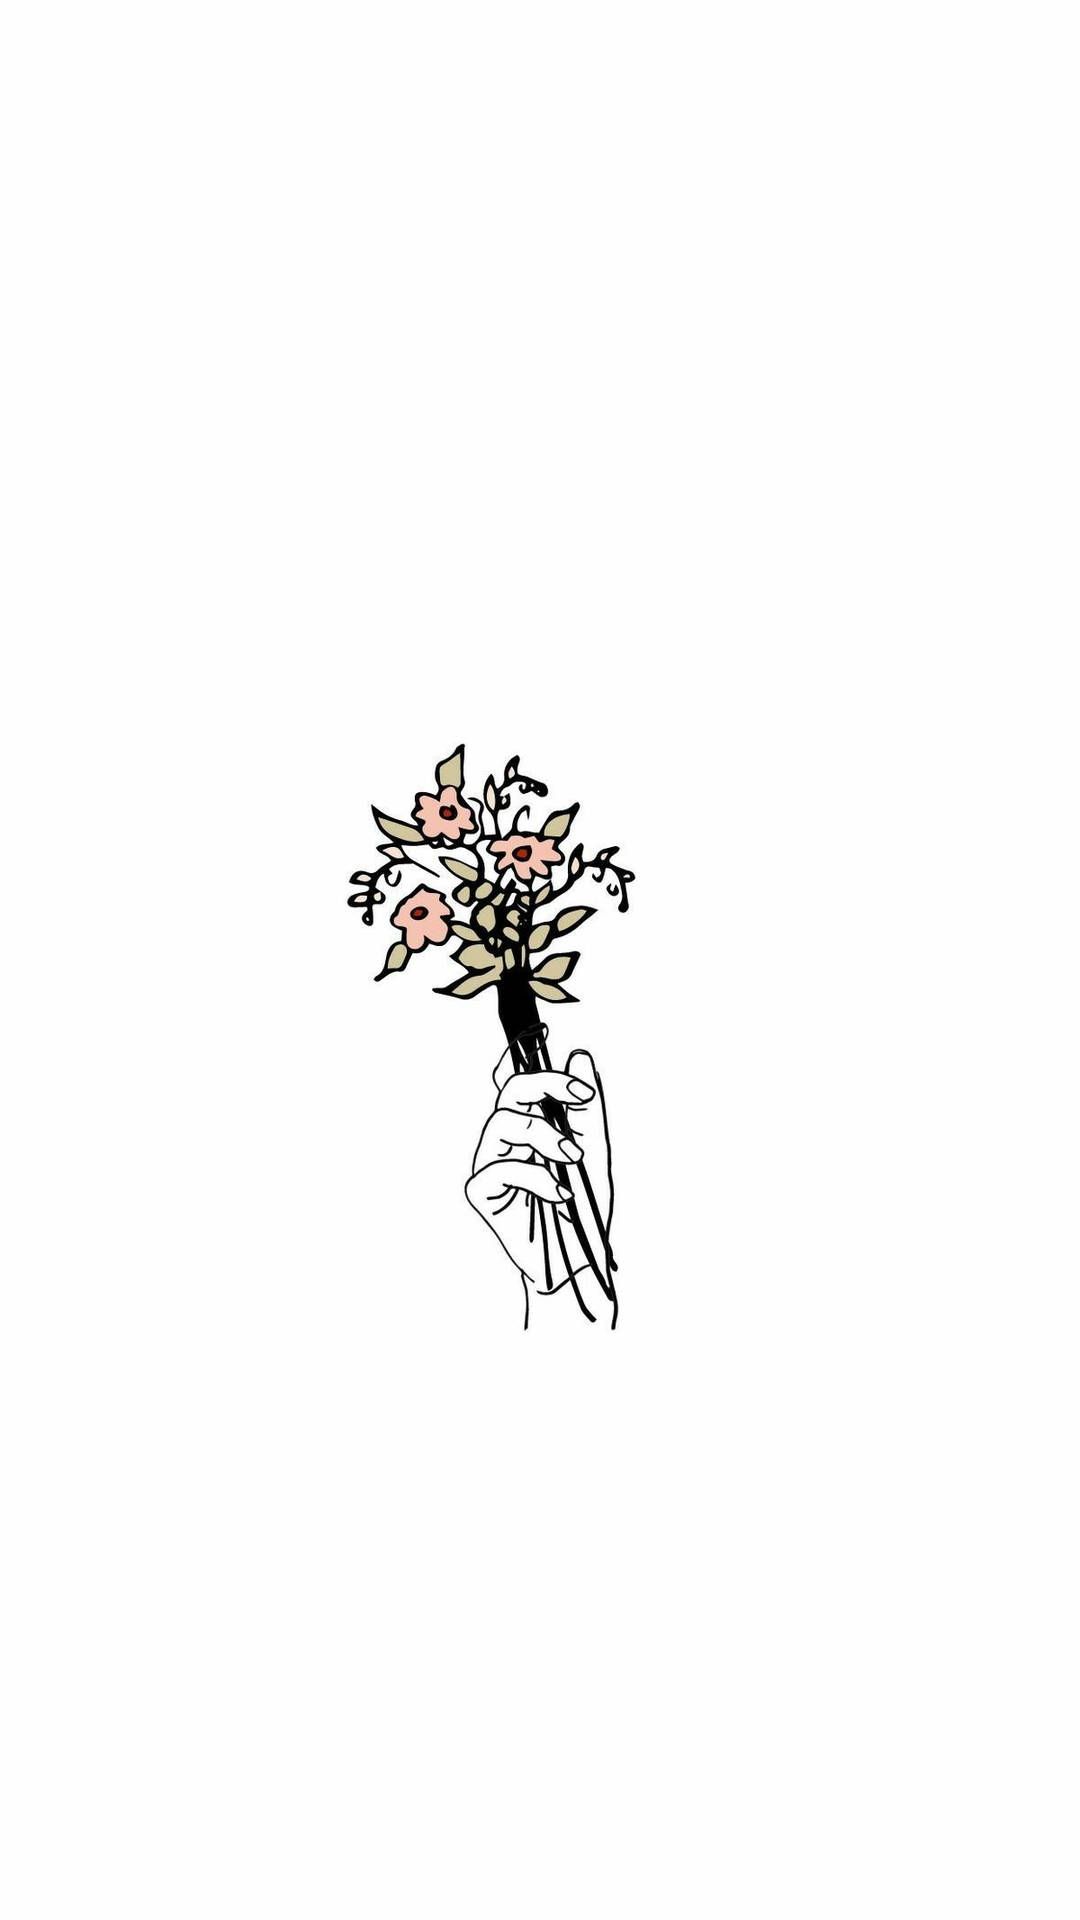 Download Hand Holding Flowers Aesthetic Sketches Wallpaper